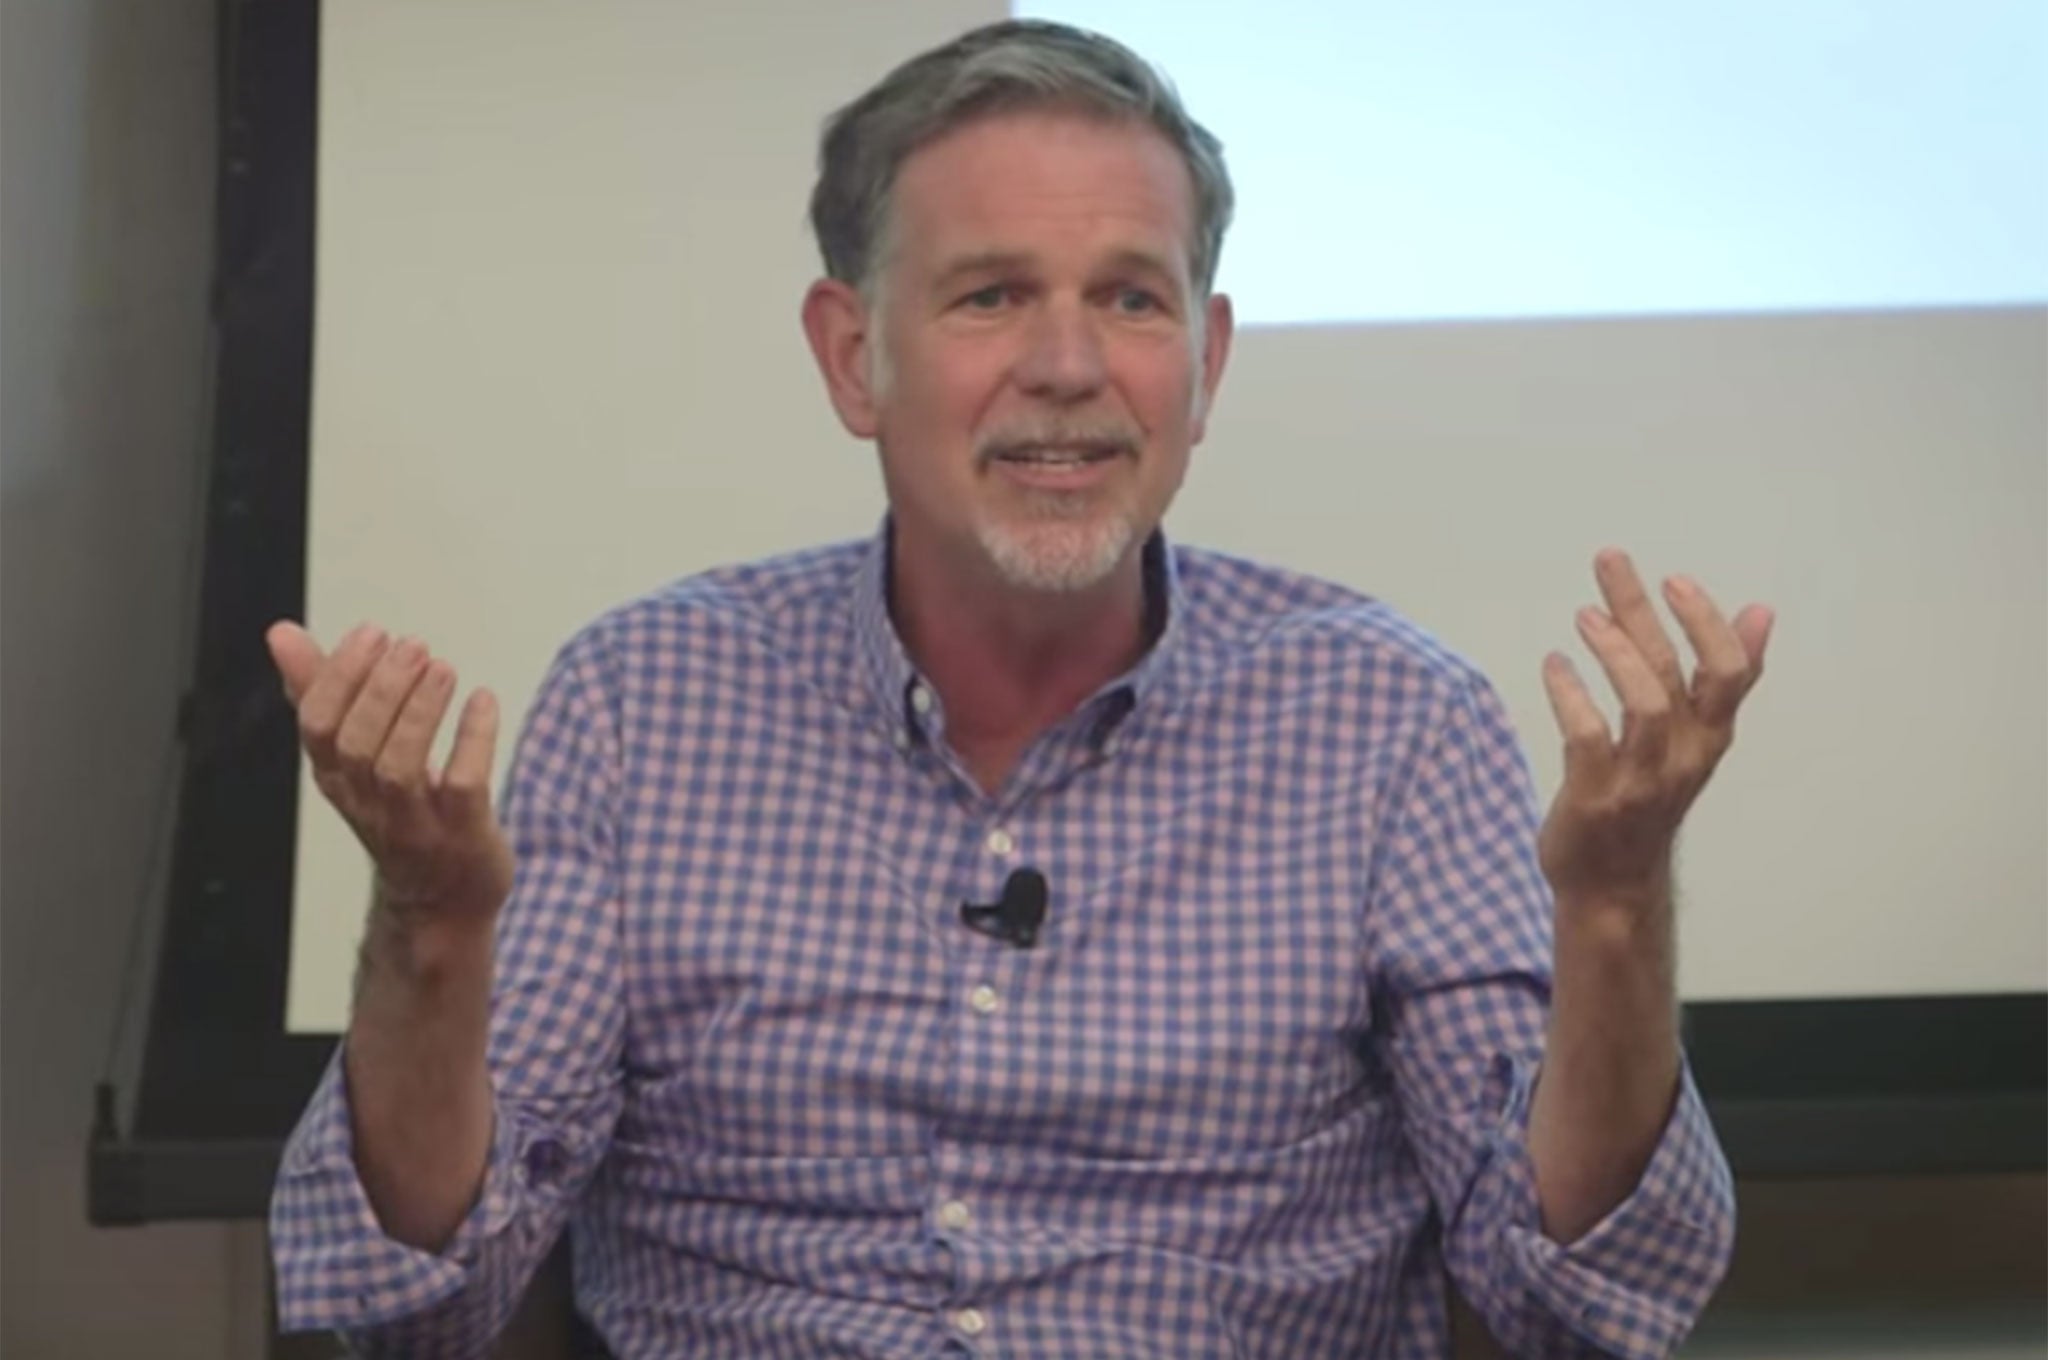 Reed Hastings, founder and CEO of Netflix